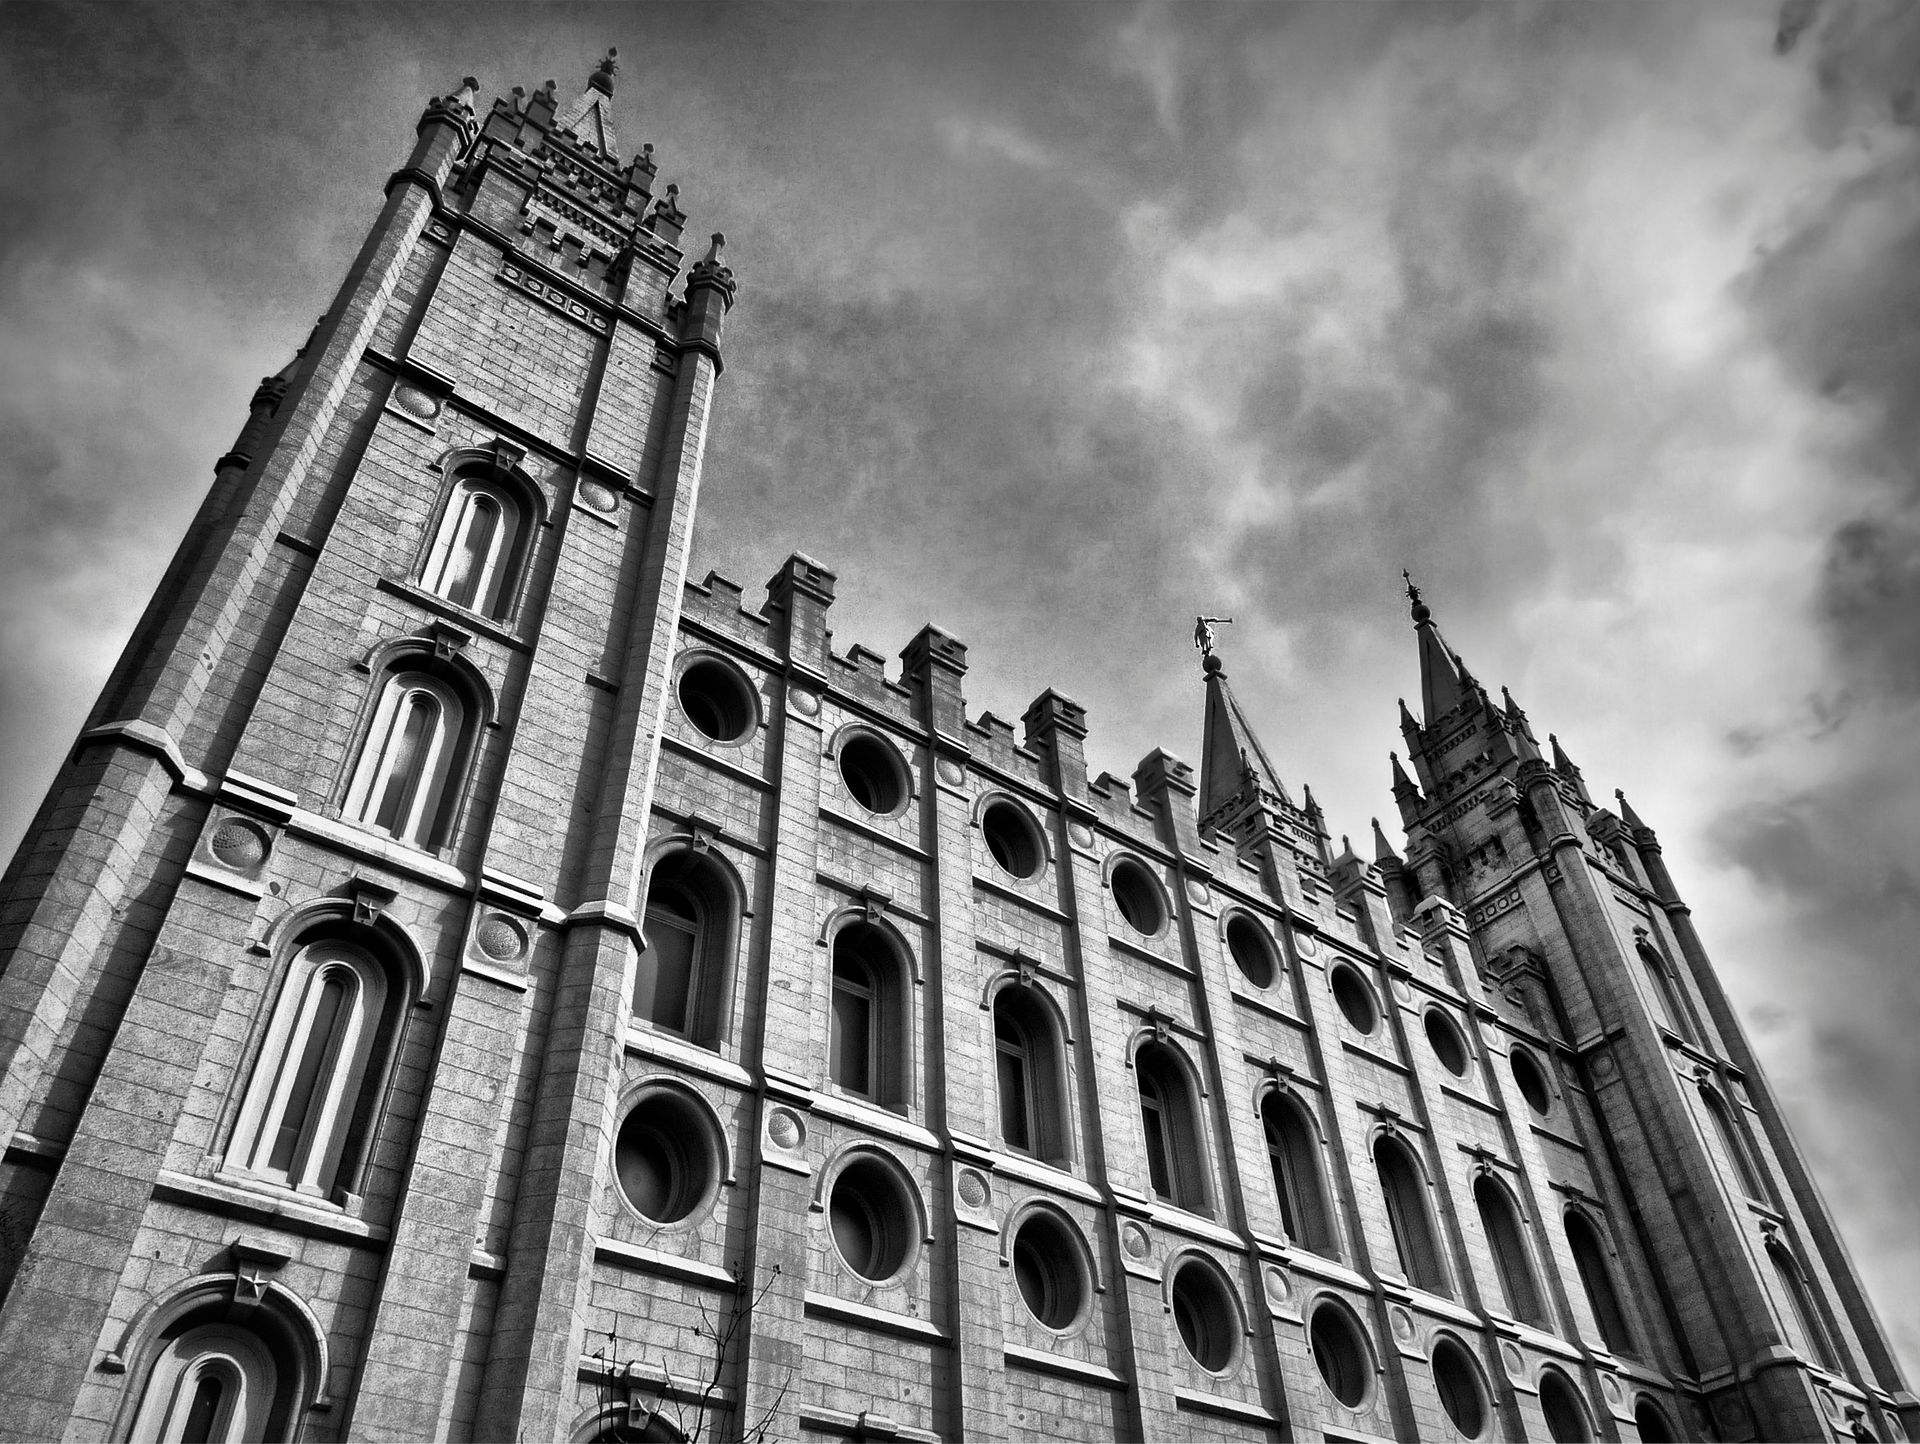 The Salt Lake Temple in black and white, including the windows and spires.